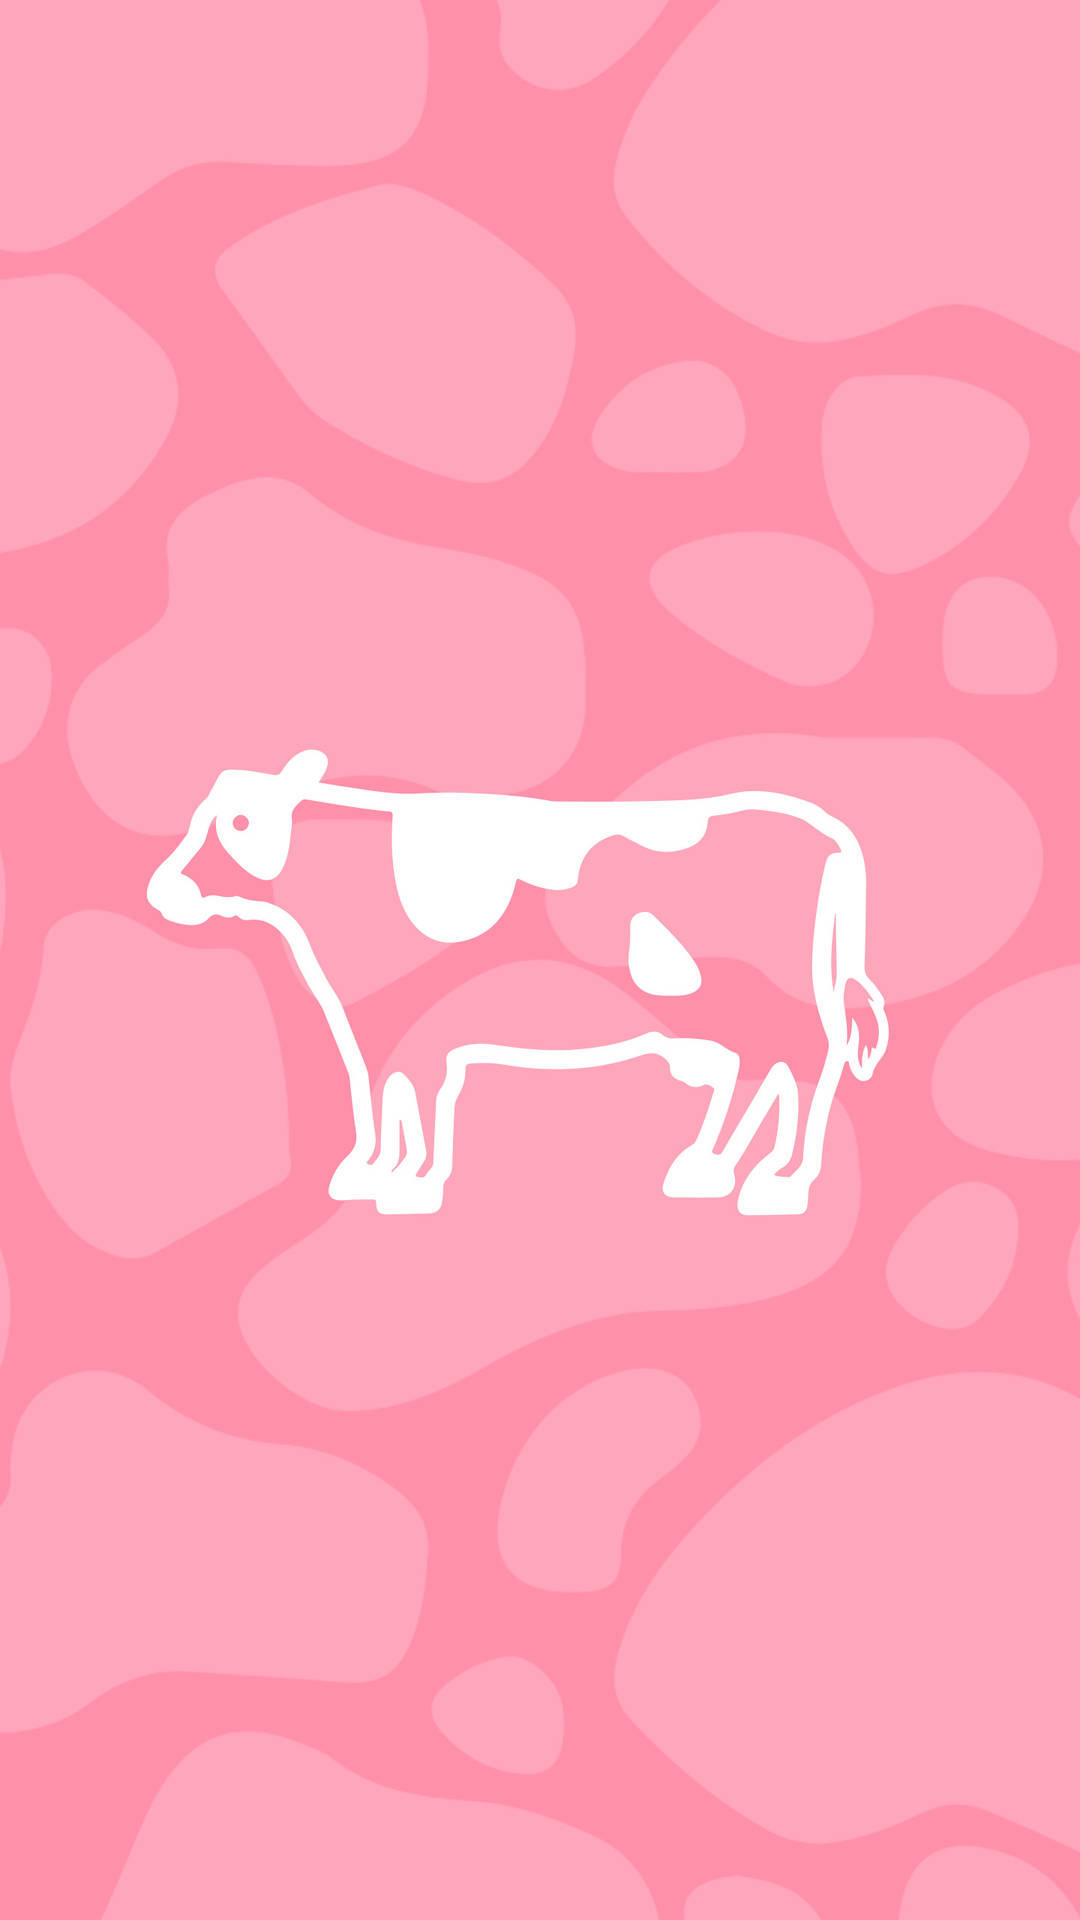 Cute pink strawberry cow on Craiyon